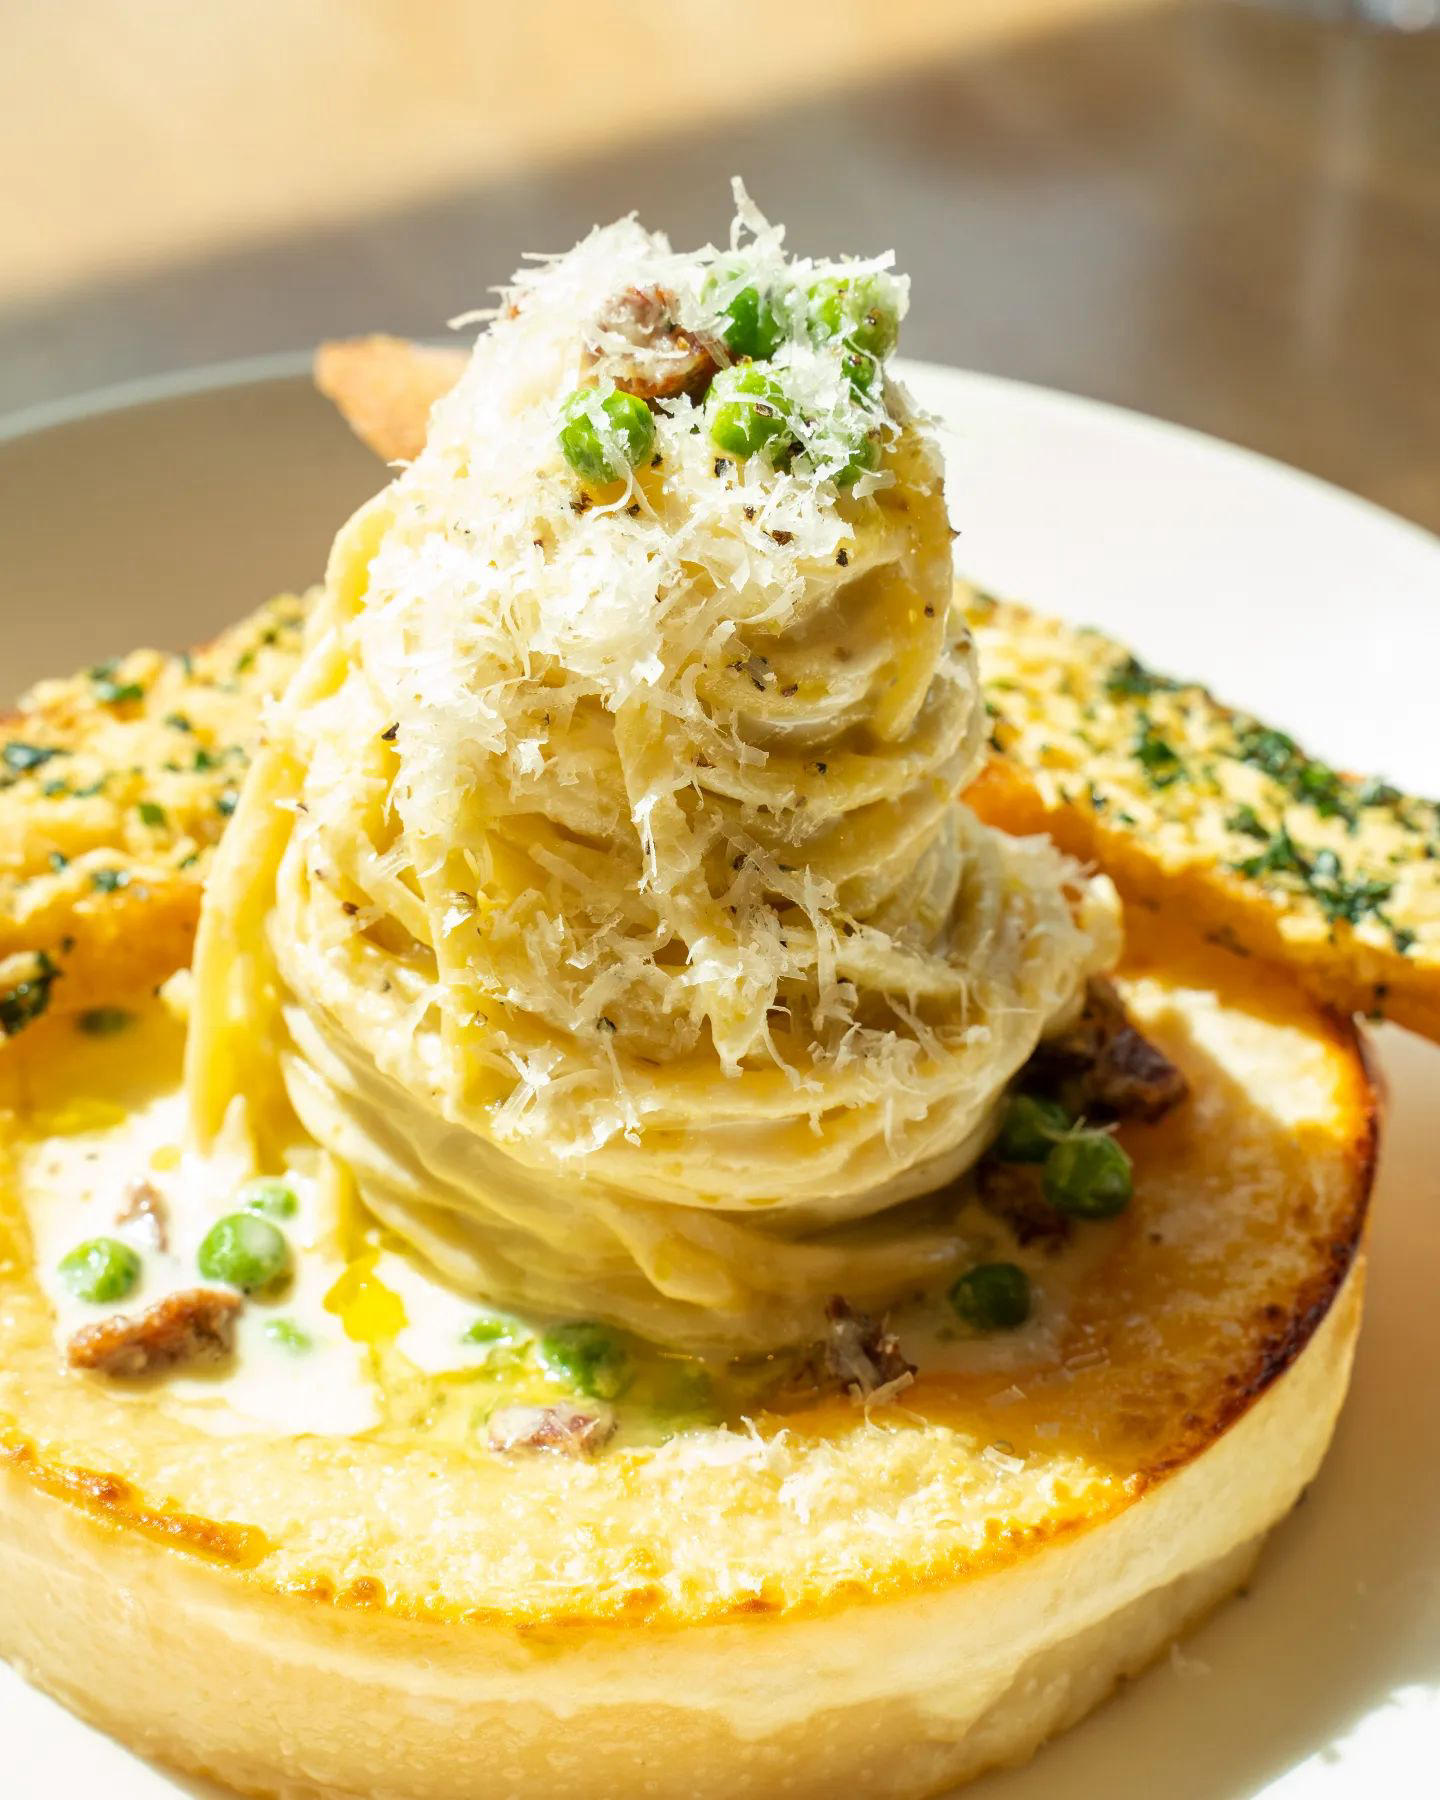 GiadaVegas - This new menu item is a showstopper